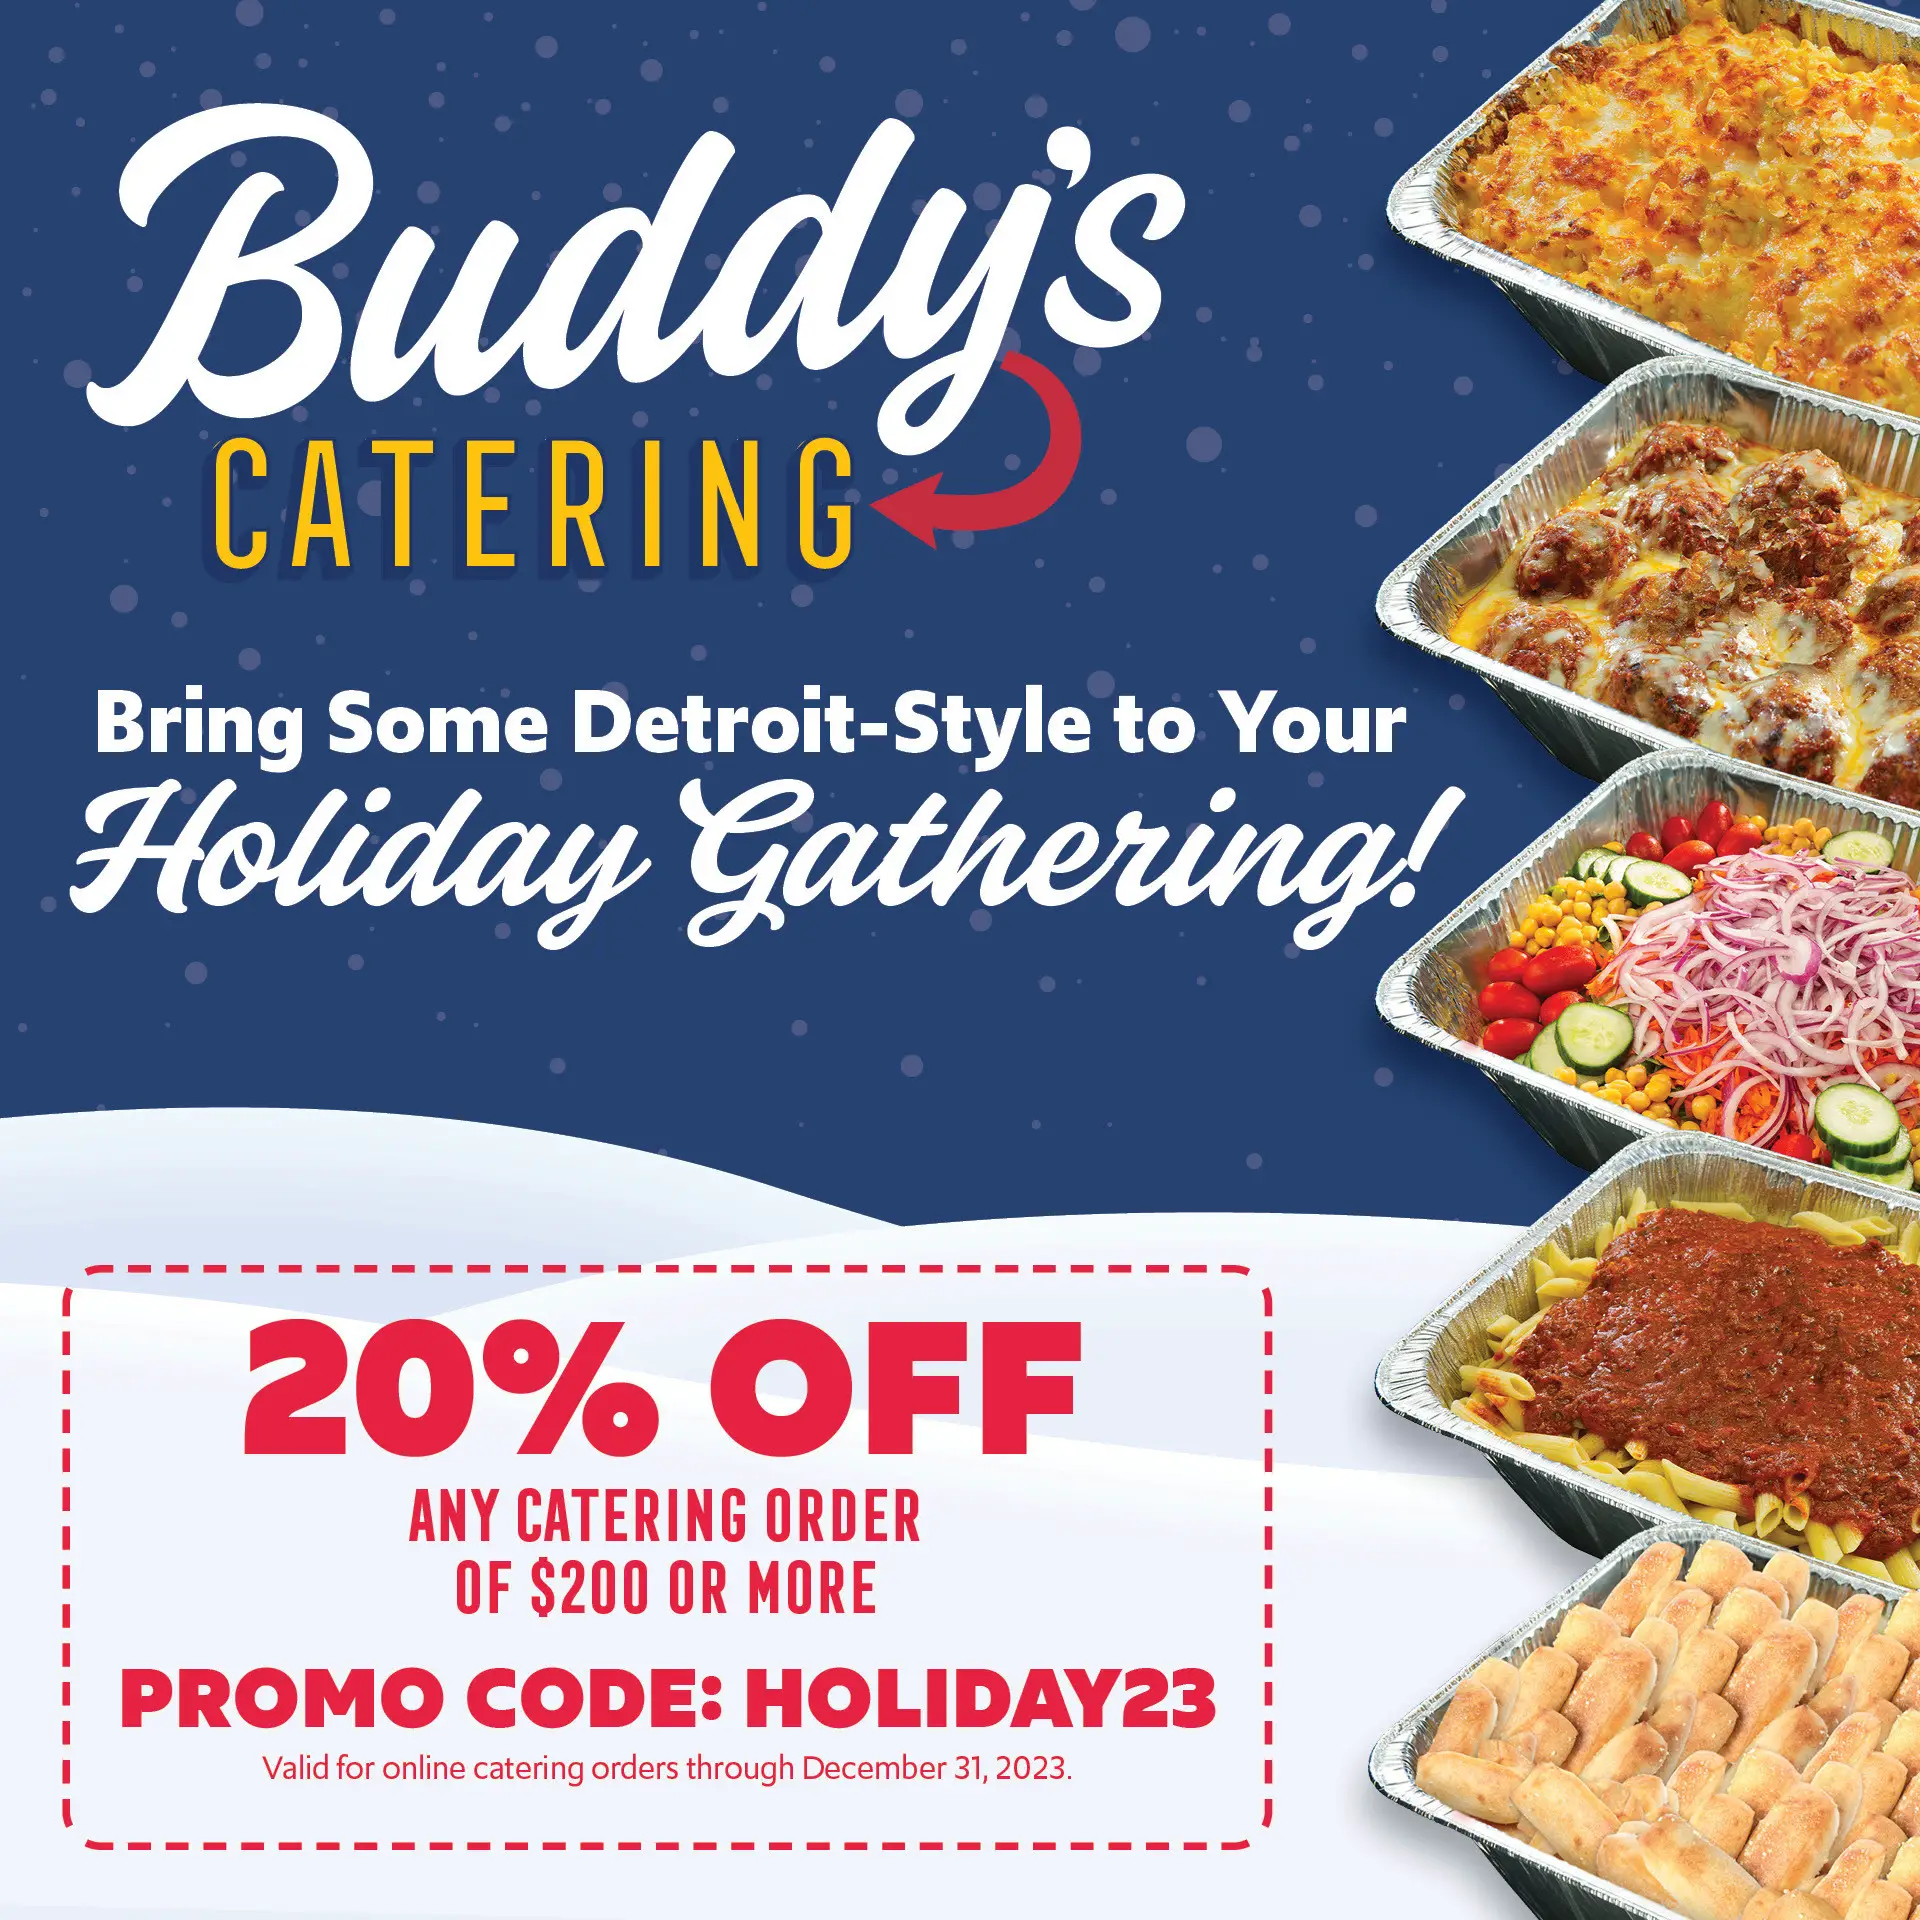 Buddy's Pizza Black Friday Holiday Season Special: 20% Catering for Orders of $200 or More